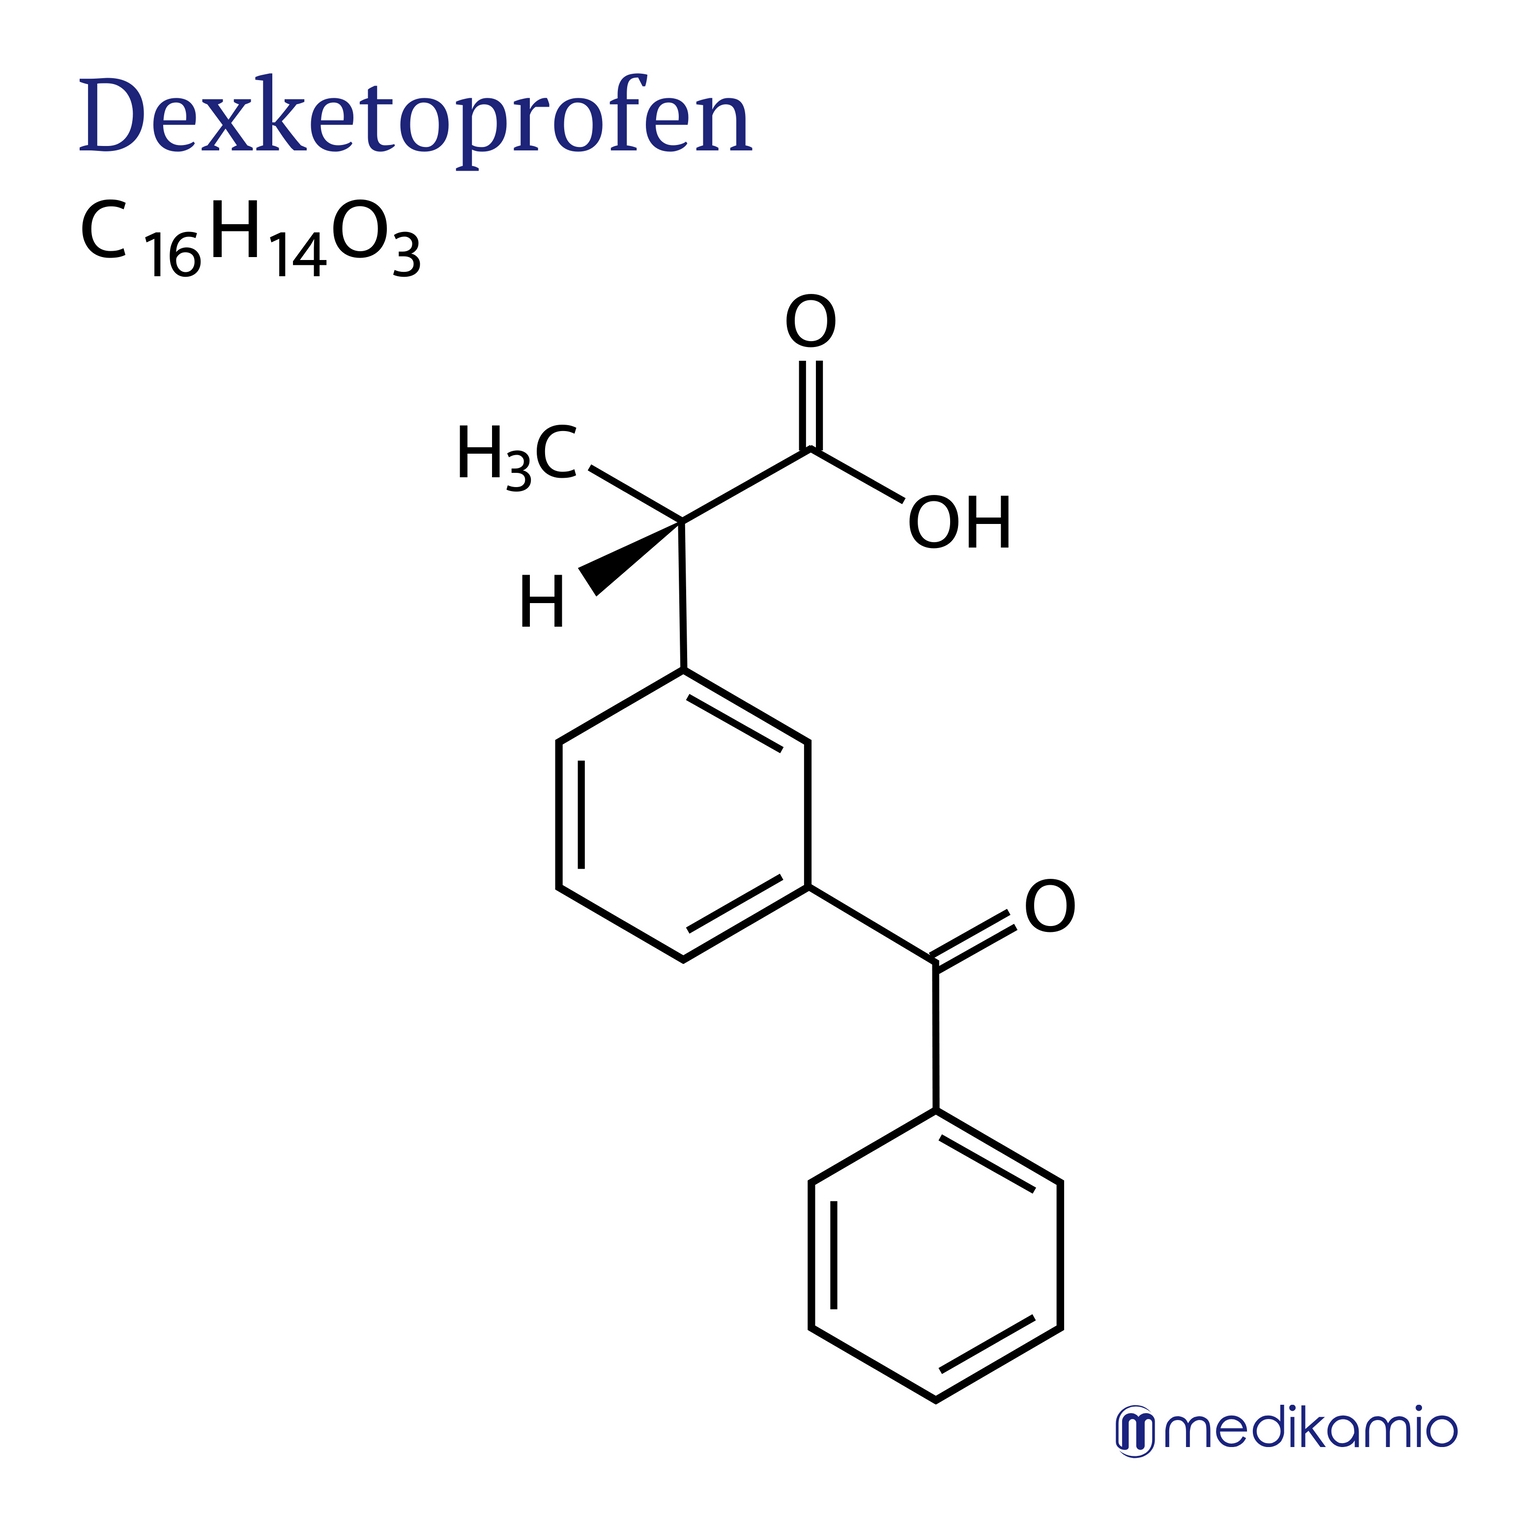 Graphic structural formula of the active substance dexketoprofen